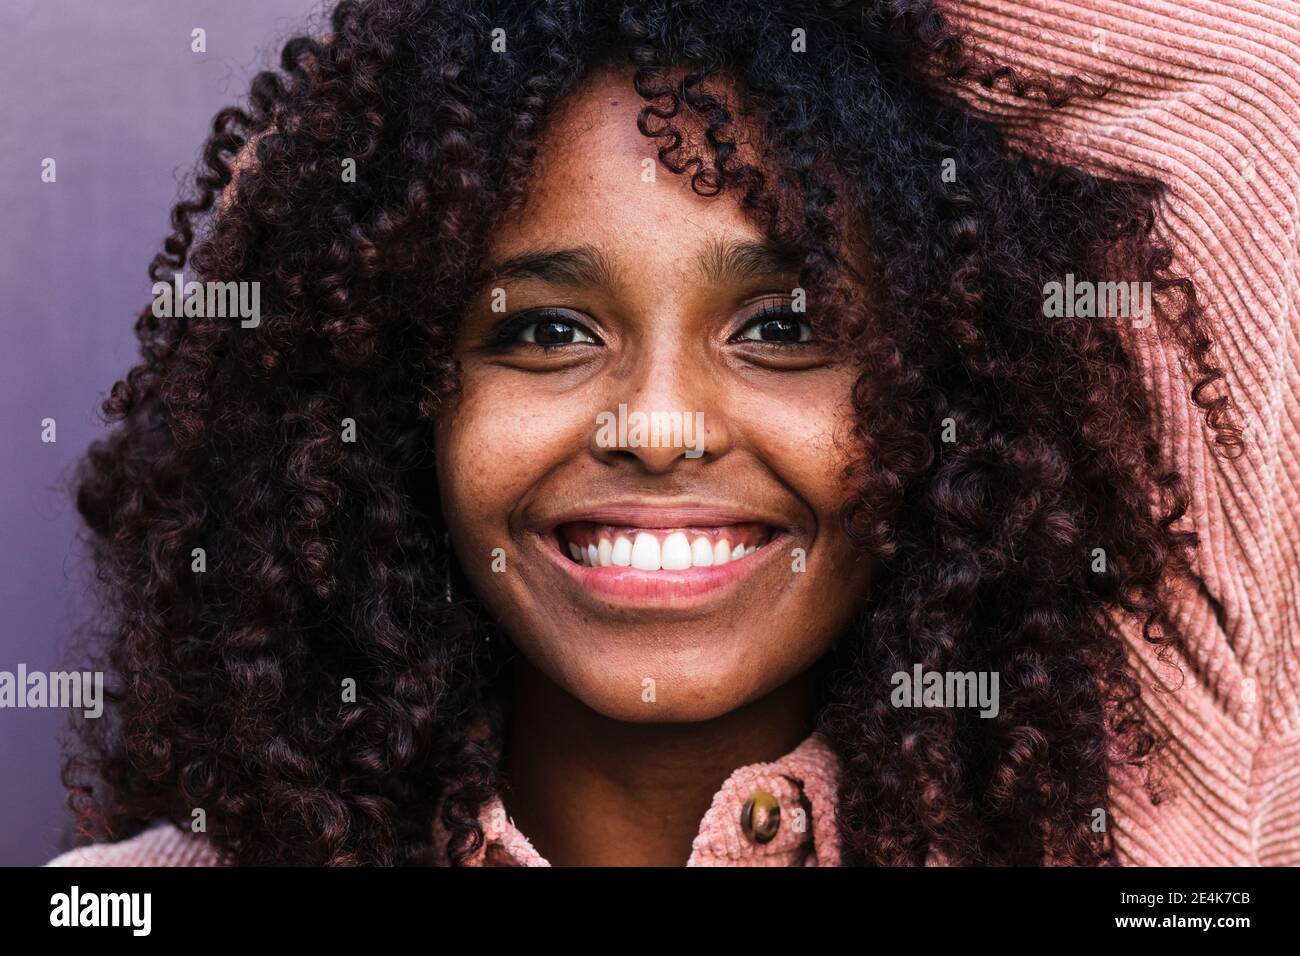 Happy afro young woman with curly hair against wall Stock Photo - Alamy